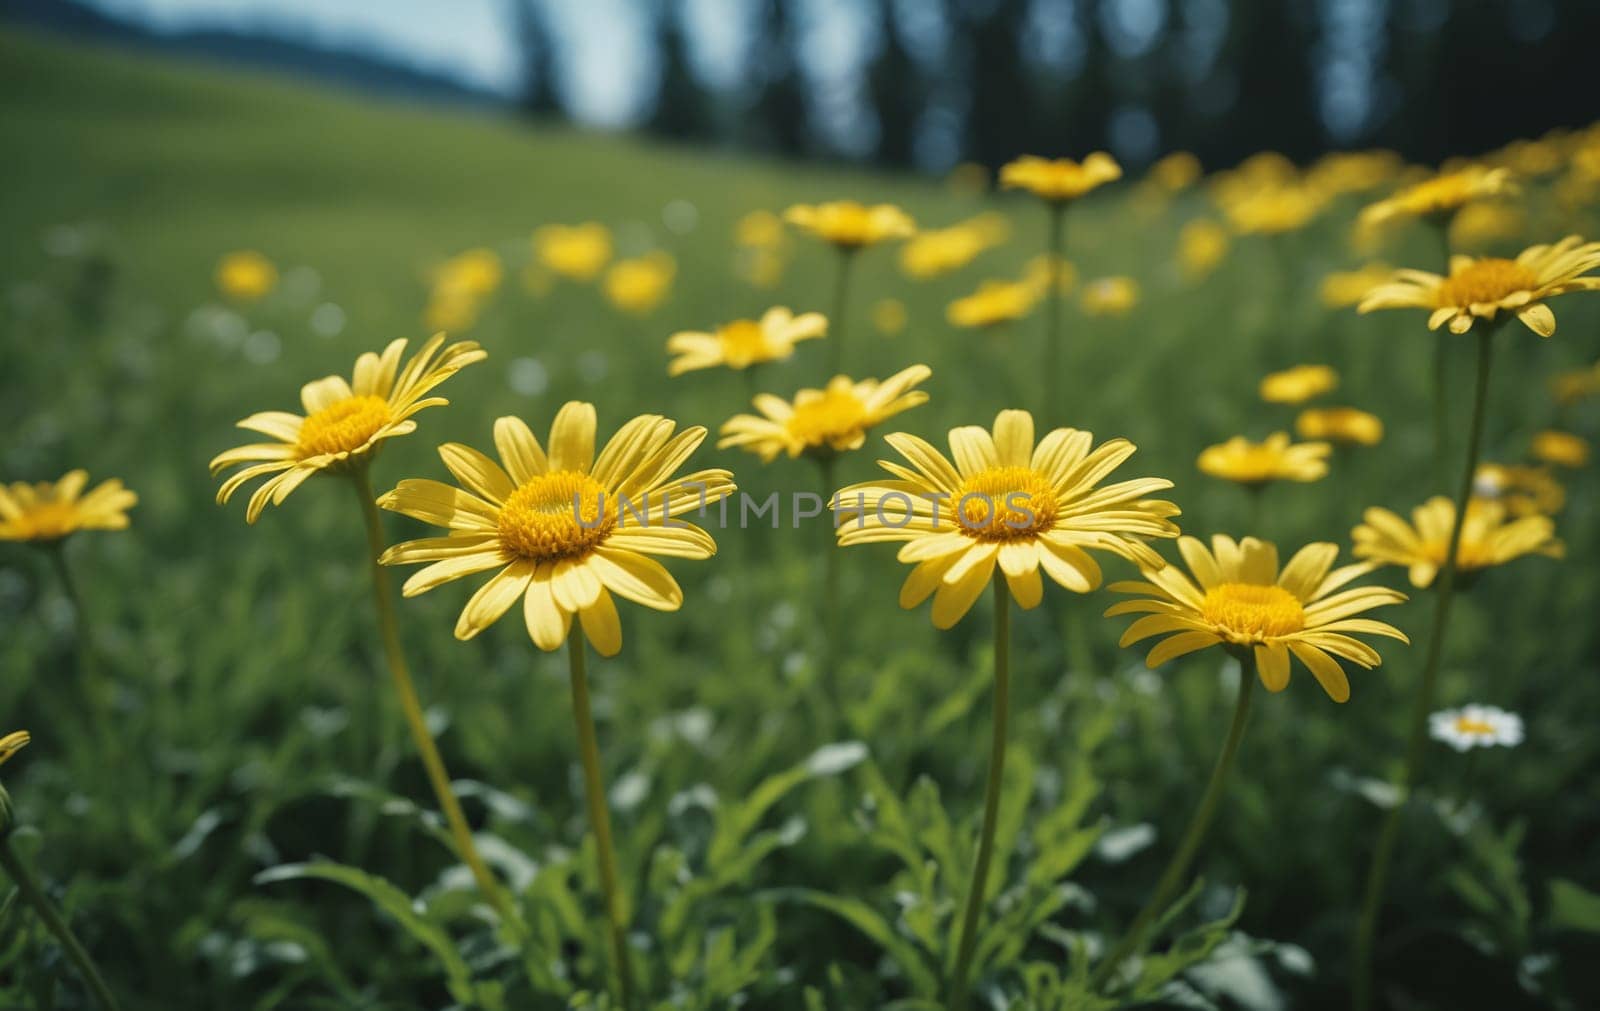 Yellow daisies in the garden. Shallow depth of field. by Andre1ns